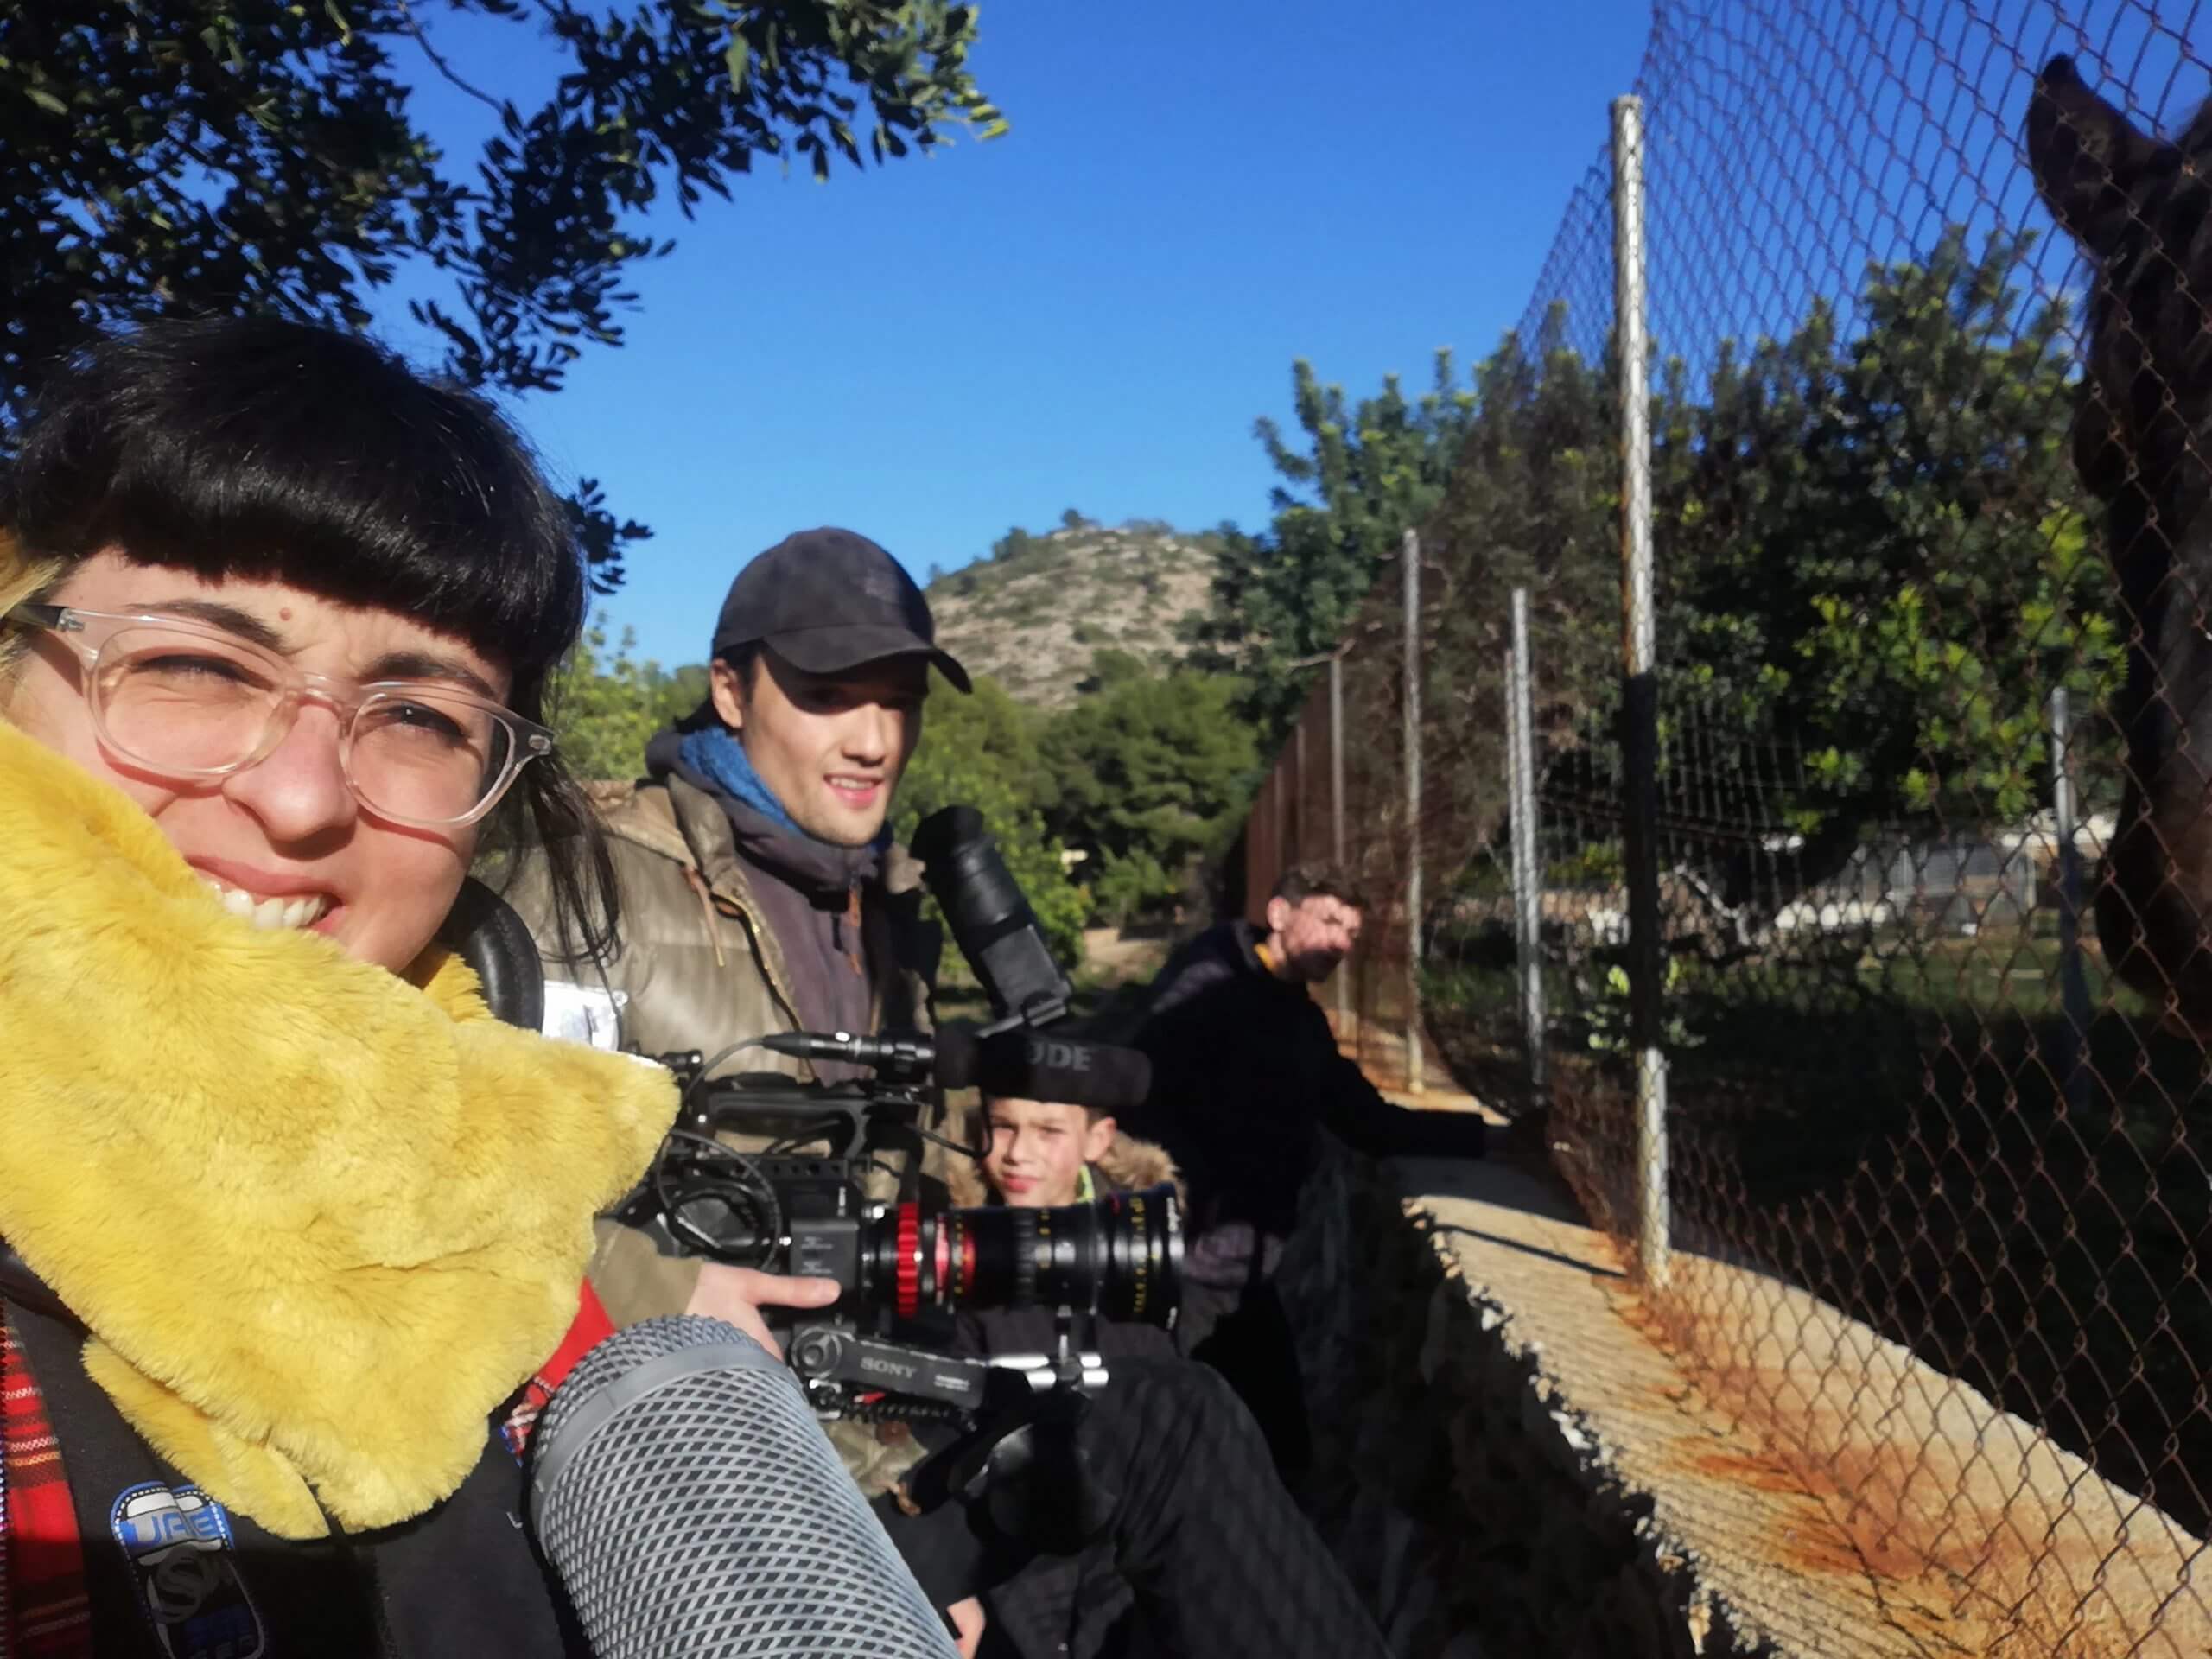 A production still from The Boy and the Suit of Lights. Inma de Reyes takes a selfie of herself and two crew members in front of a fence. One of the crew members holds a large camera.